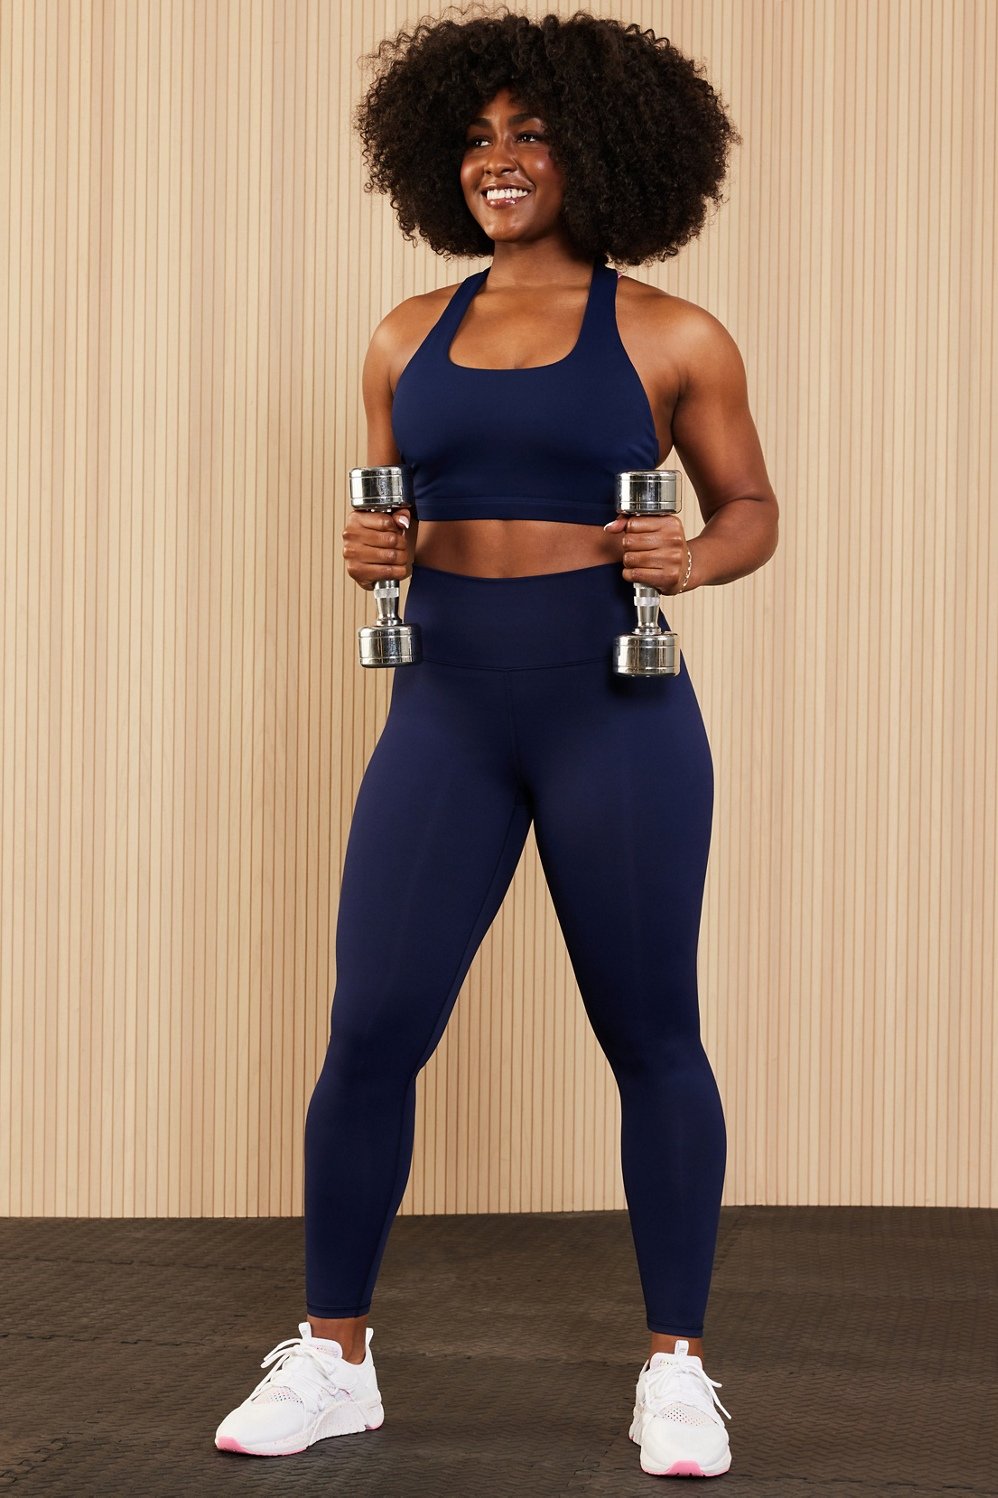 Fabletics Boost PowerHold Navy Blue Criss Cross Back High-Waisted 7/8 Leggings  XS - $32 - From Erin